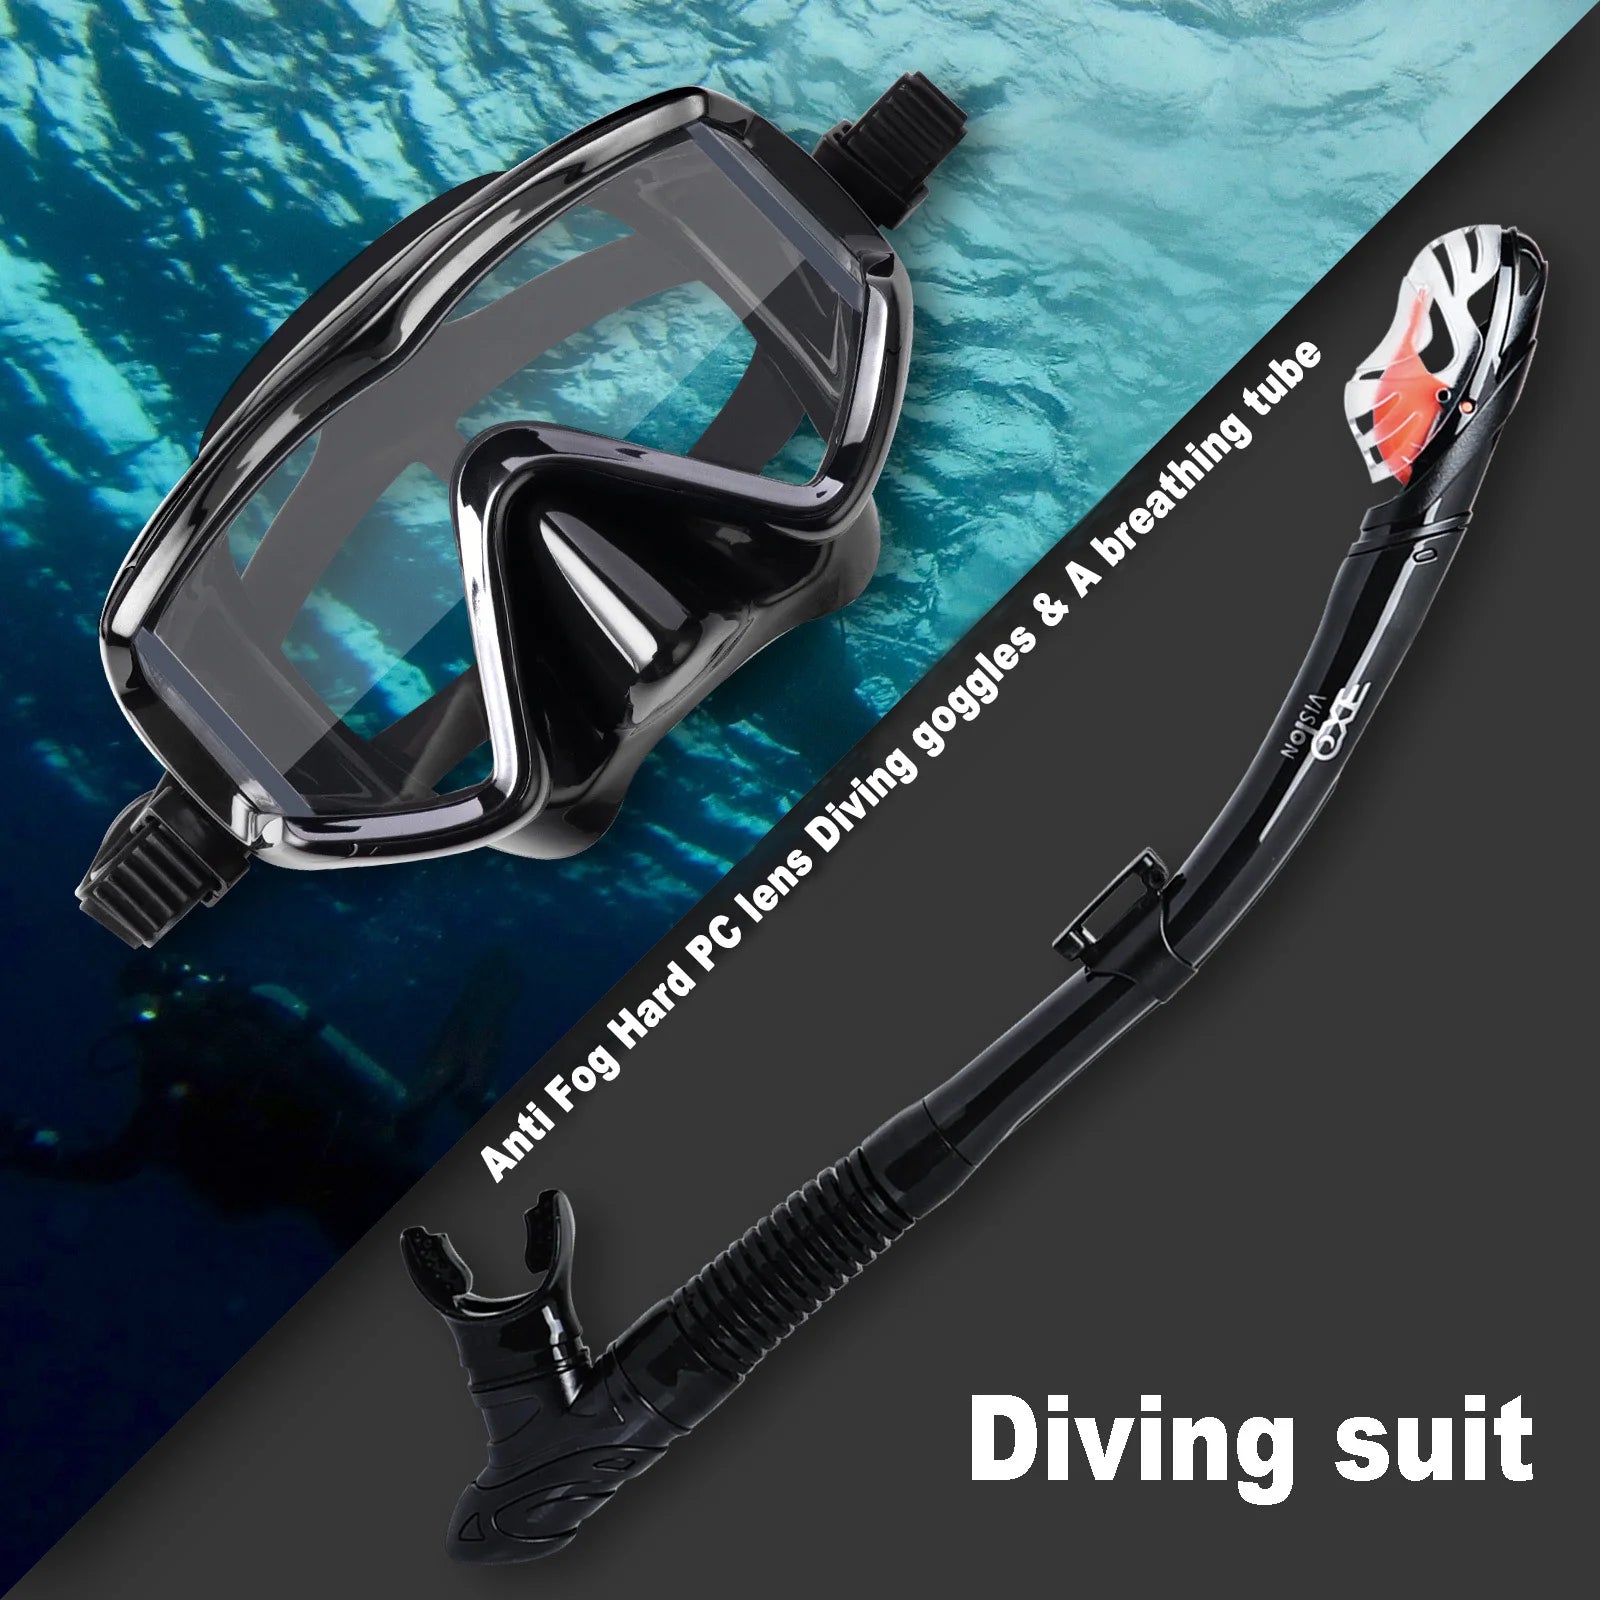 Dry Snorkel Set, Pano 3 Window Snorkel Mask, Anti-Fog Scuba Diving Goggle and Snorkel, Adult Snorkeling Swim Mask with  PC  Lens